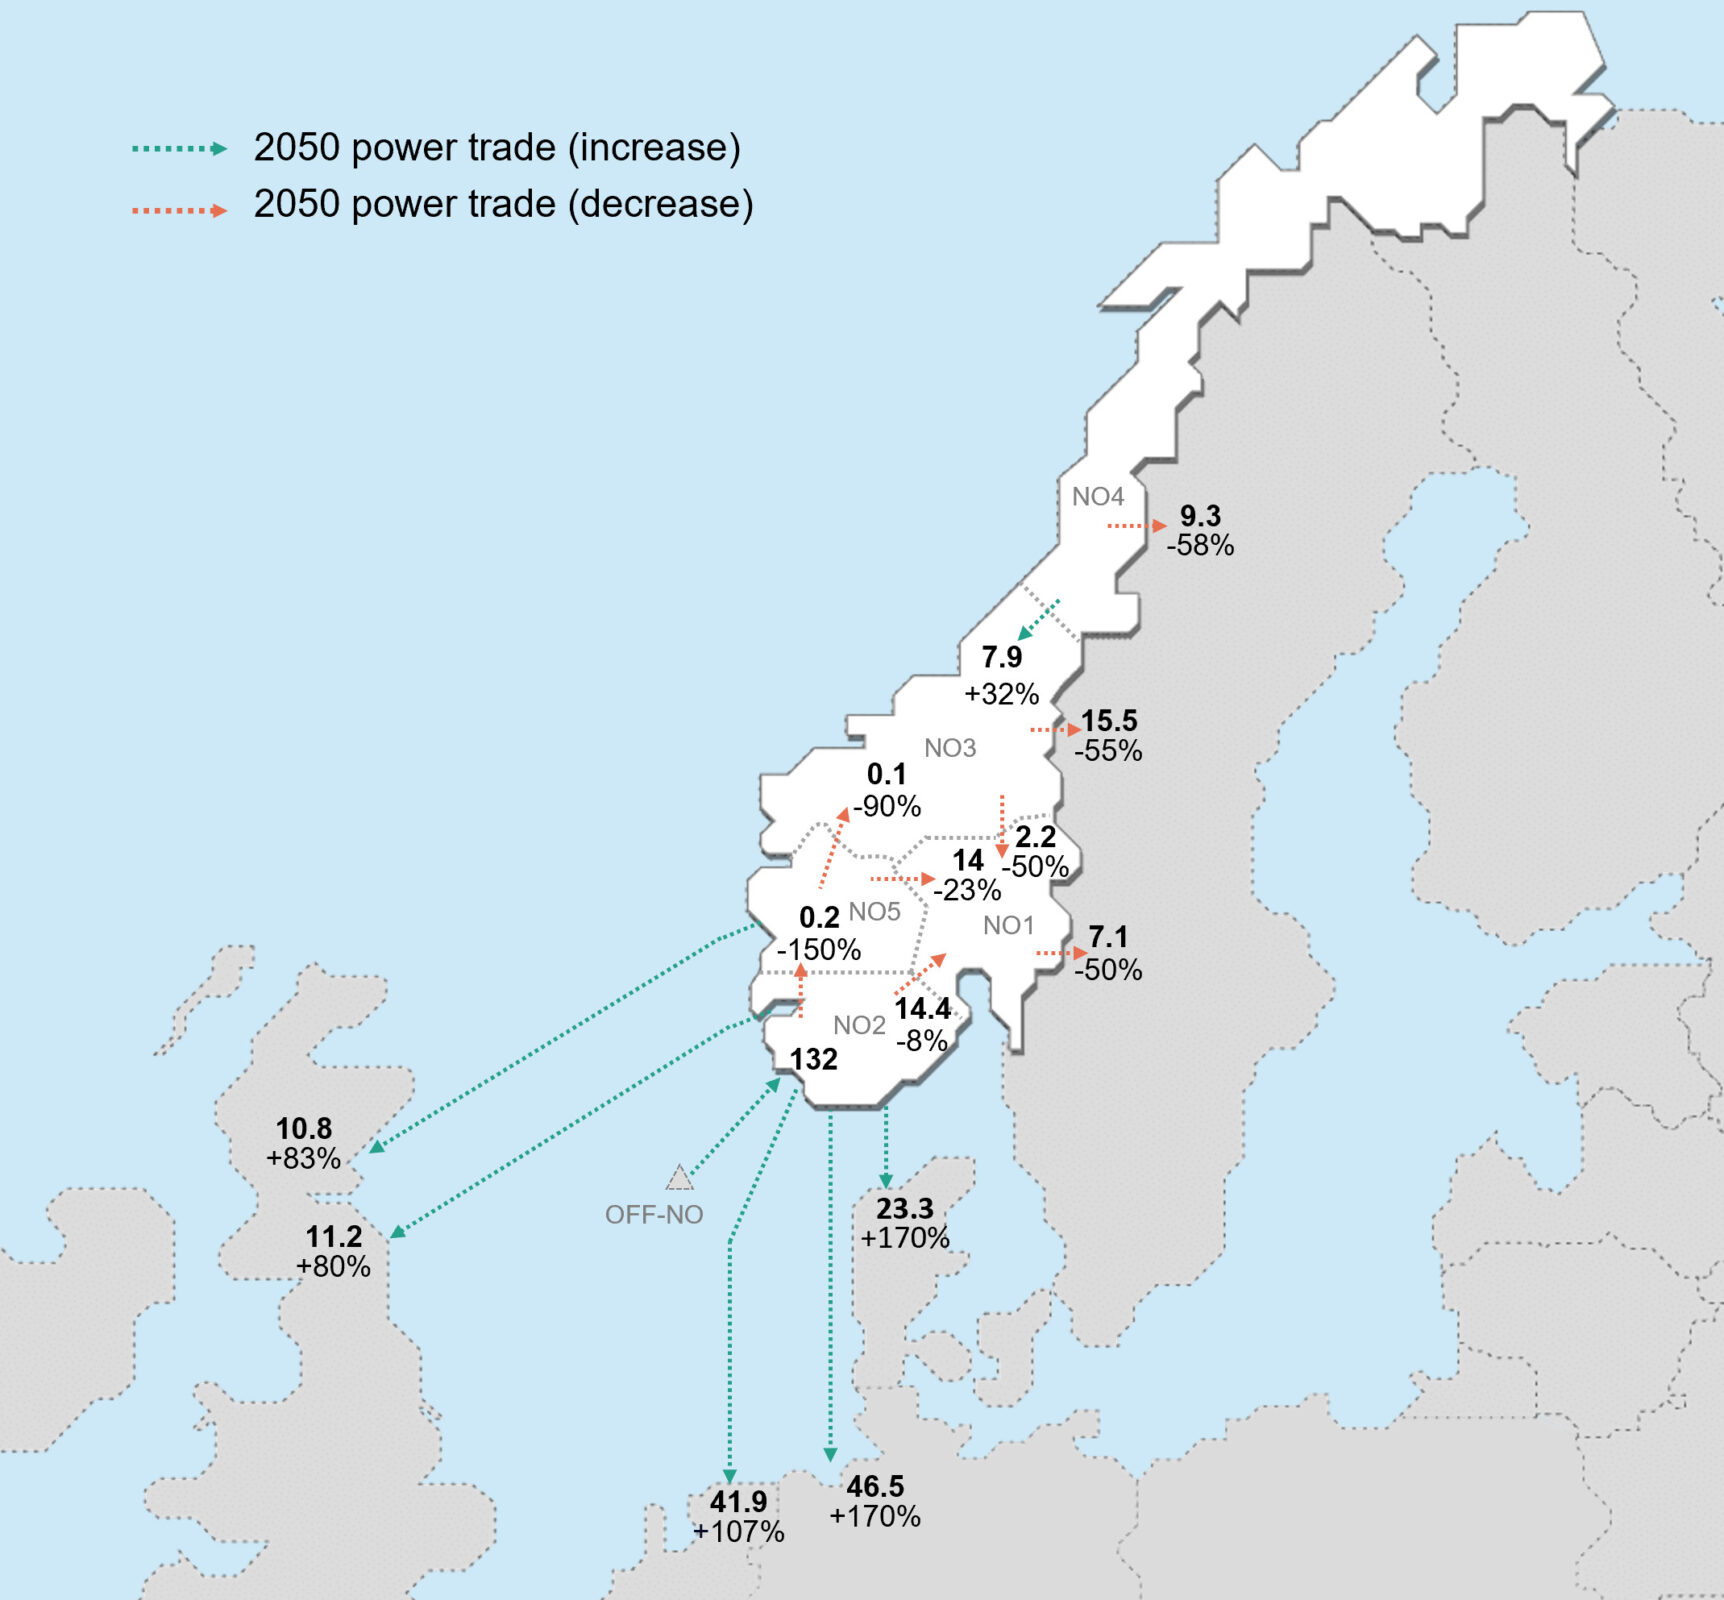 Preliminary results with regards to changes in power trade within Norway and import/export from Norway.